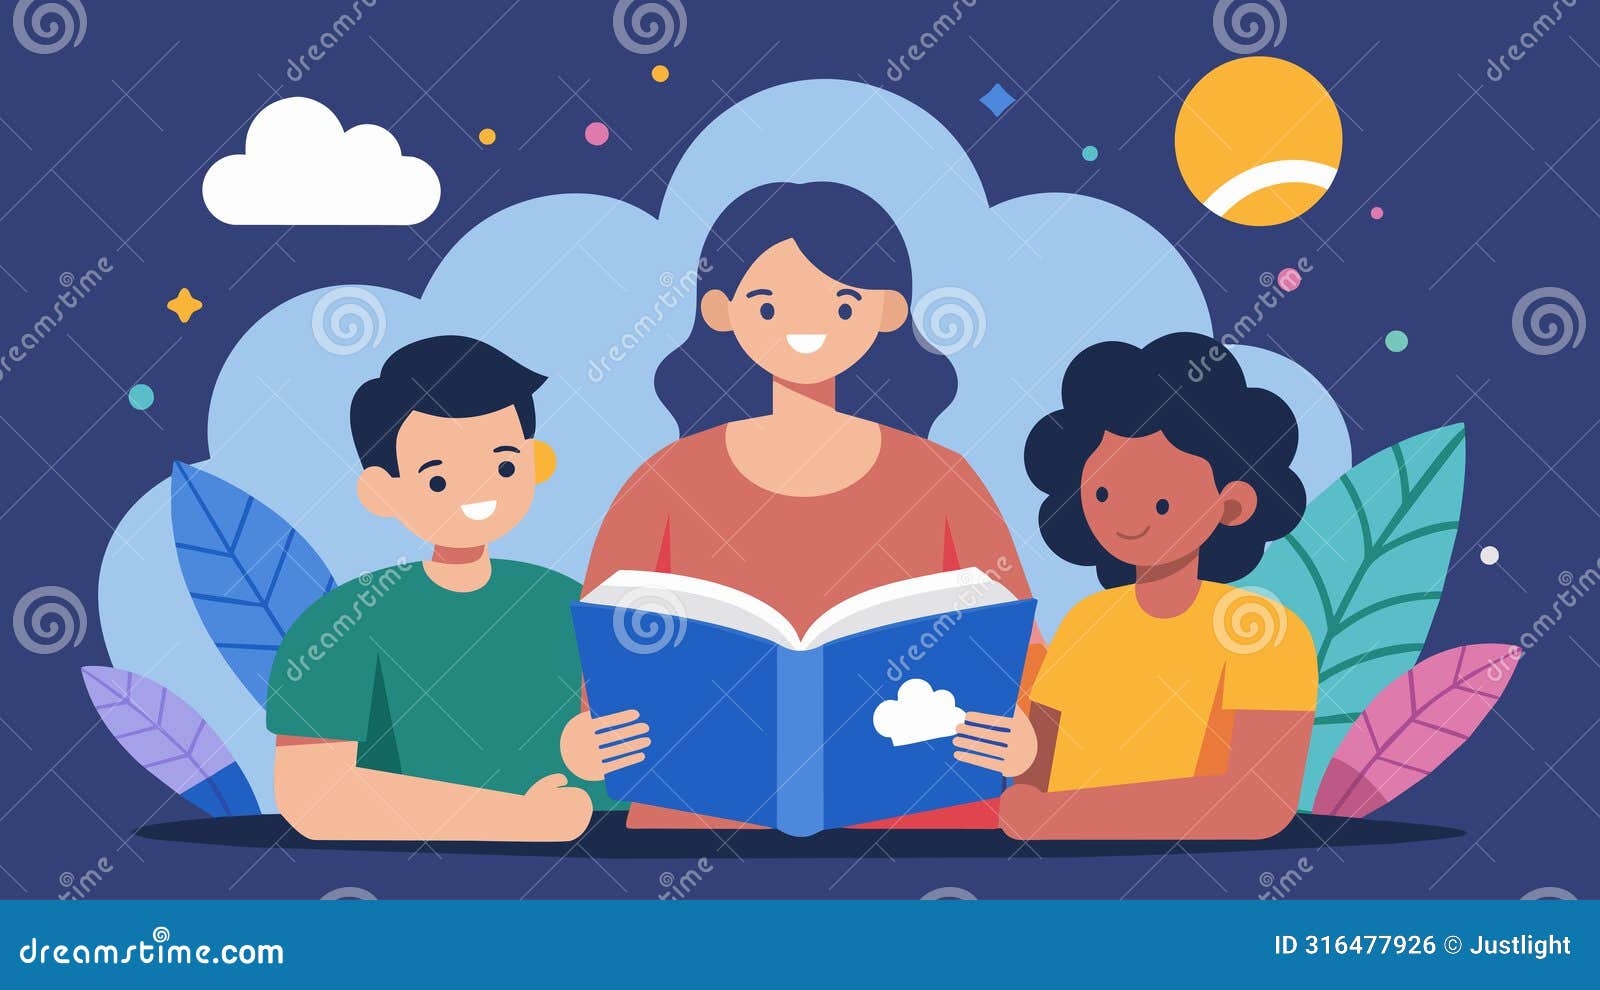 a monthly book club for parents focuses on literature related to neurodiversity creating a space for discussion and